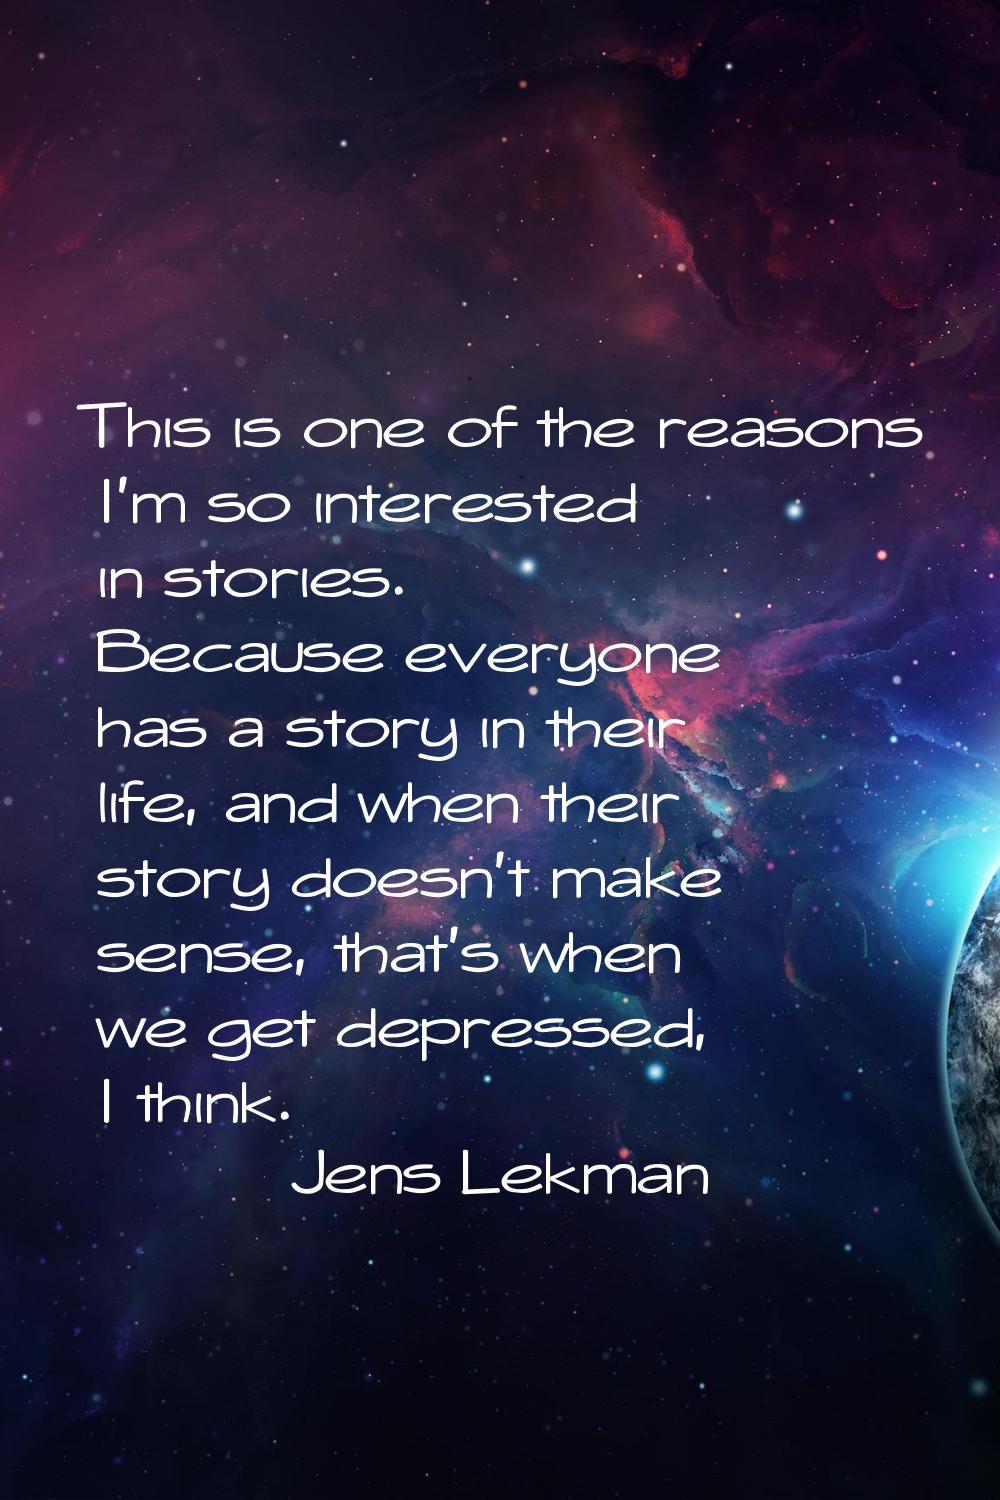 This is one of the reasons I'm so interested in stories. Because everyone has a story in their life